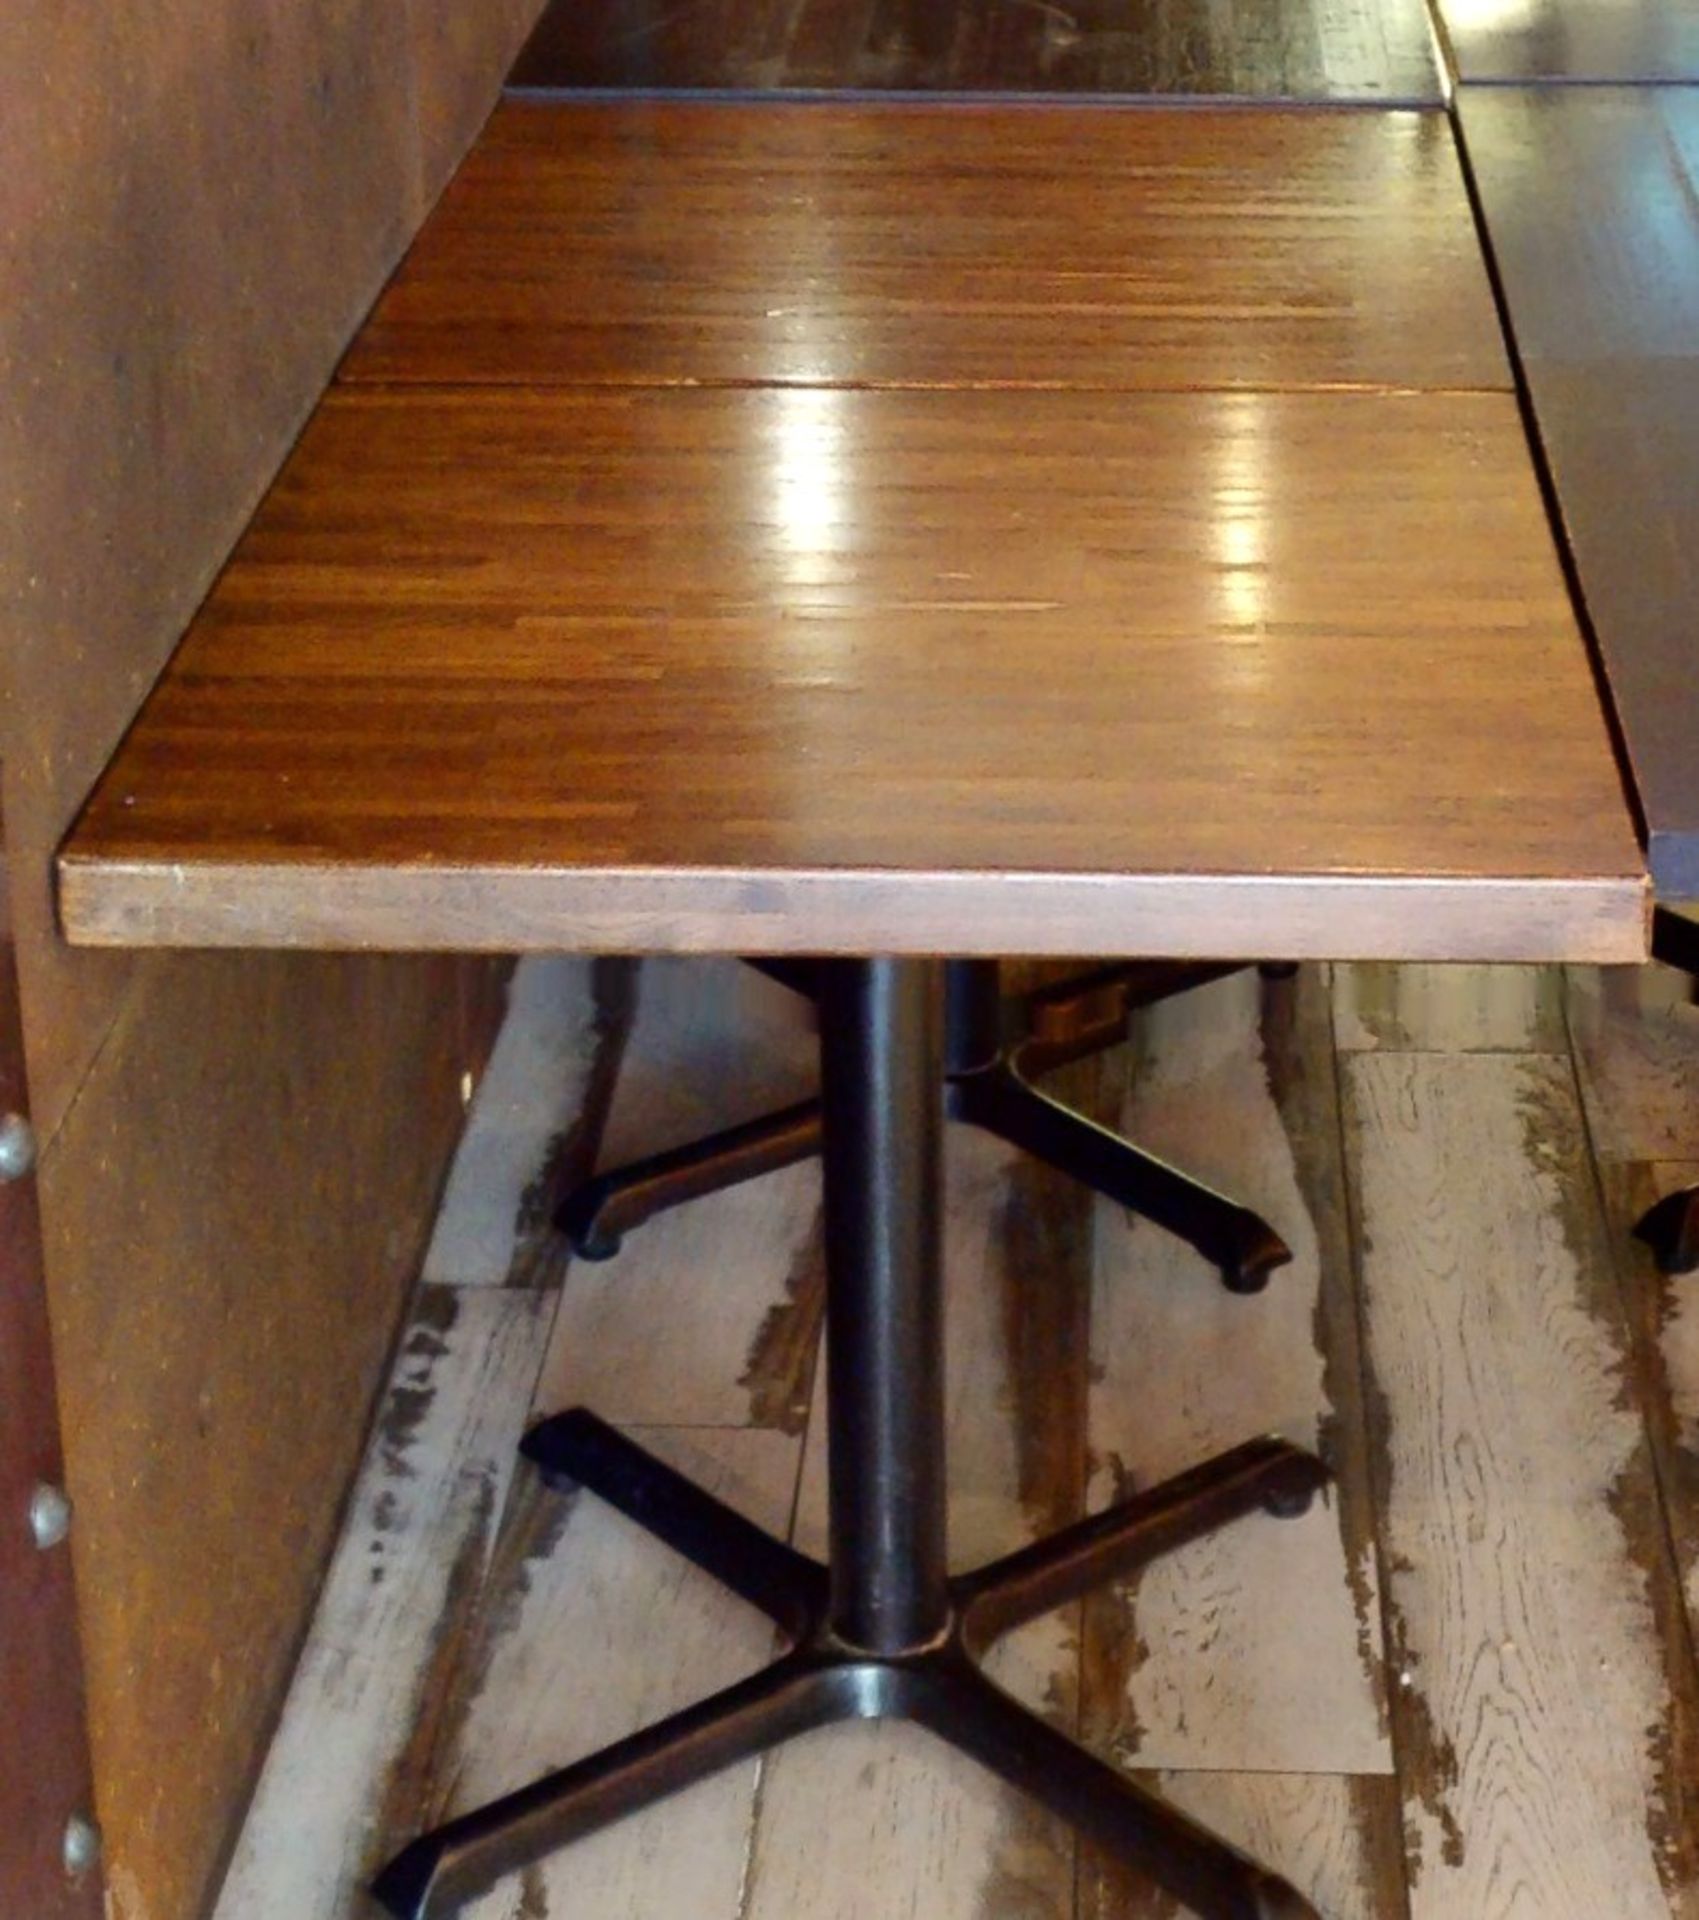 4 x Square Restaurant Tables With Light Brown Wooden Tops and Cast Iron Bases